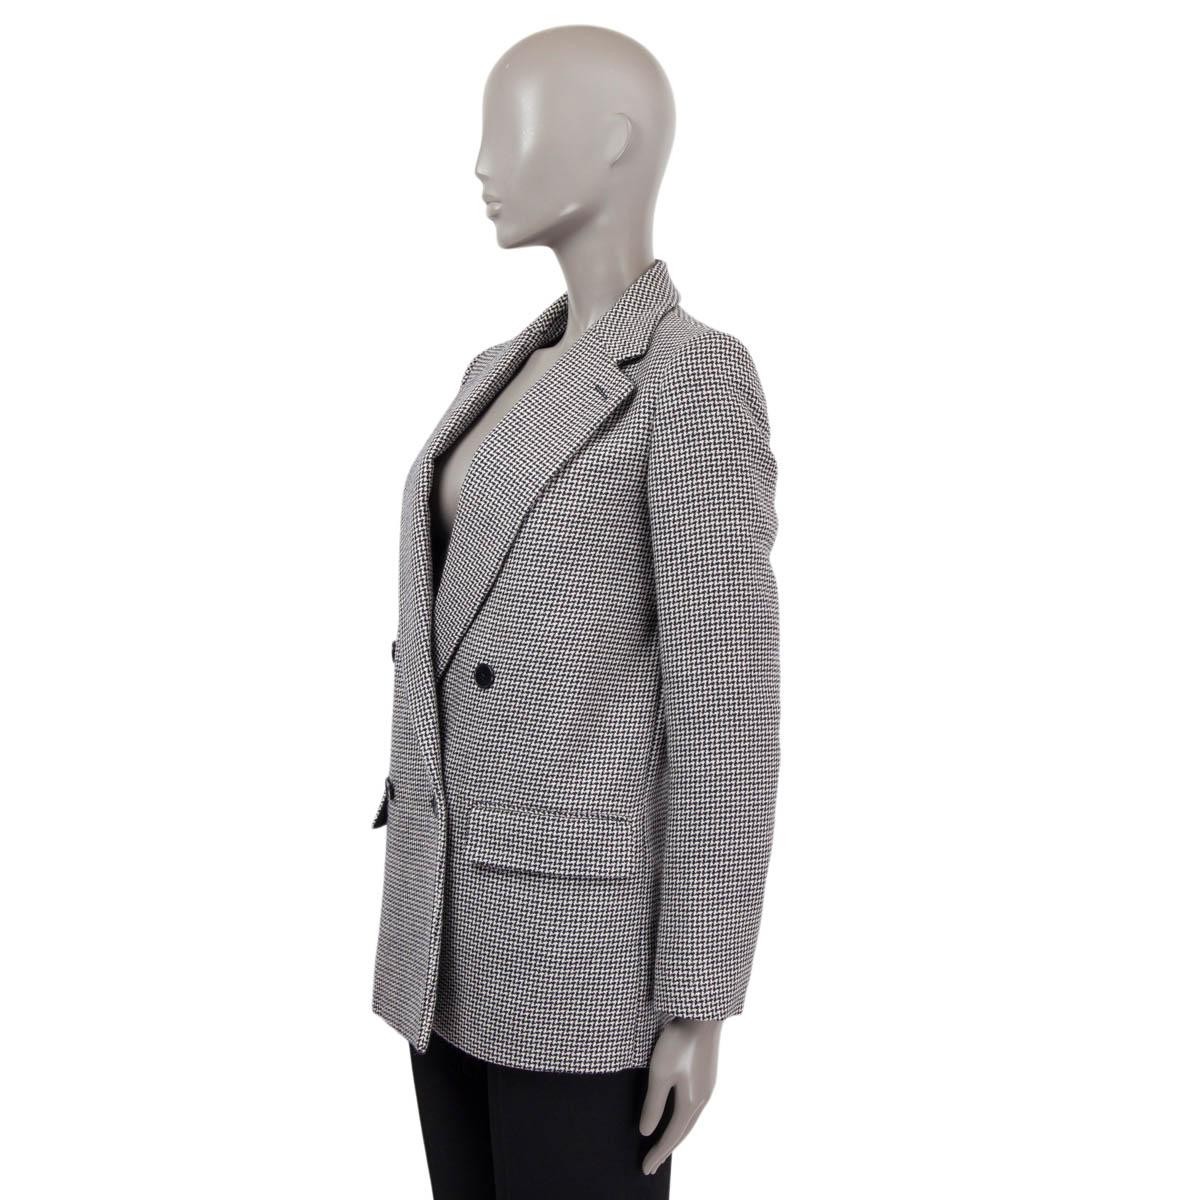 STELLA MCCARTNEY black white wool HOUNDSTOOTH DOUBLE BREASTED Blazer Jacket 38 S In Excellent Condition For Sale In Zürich, CH